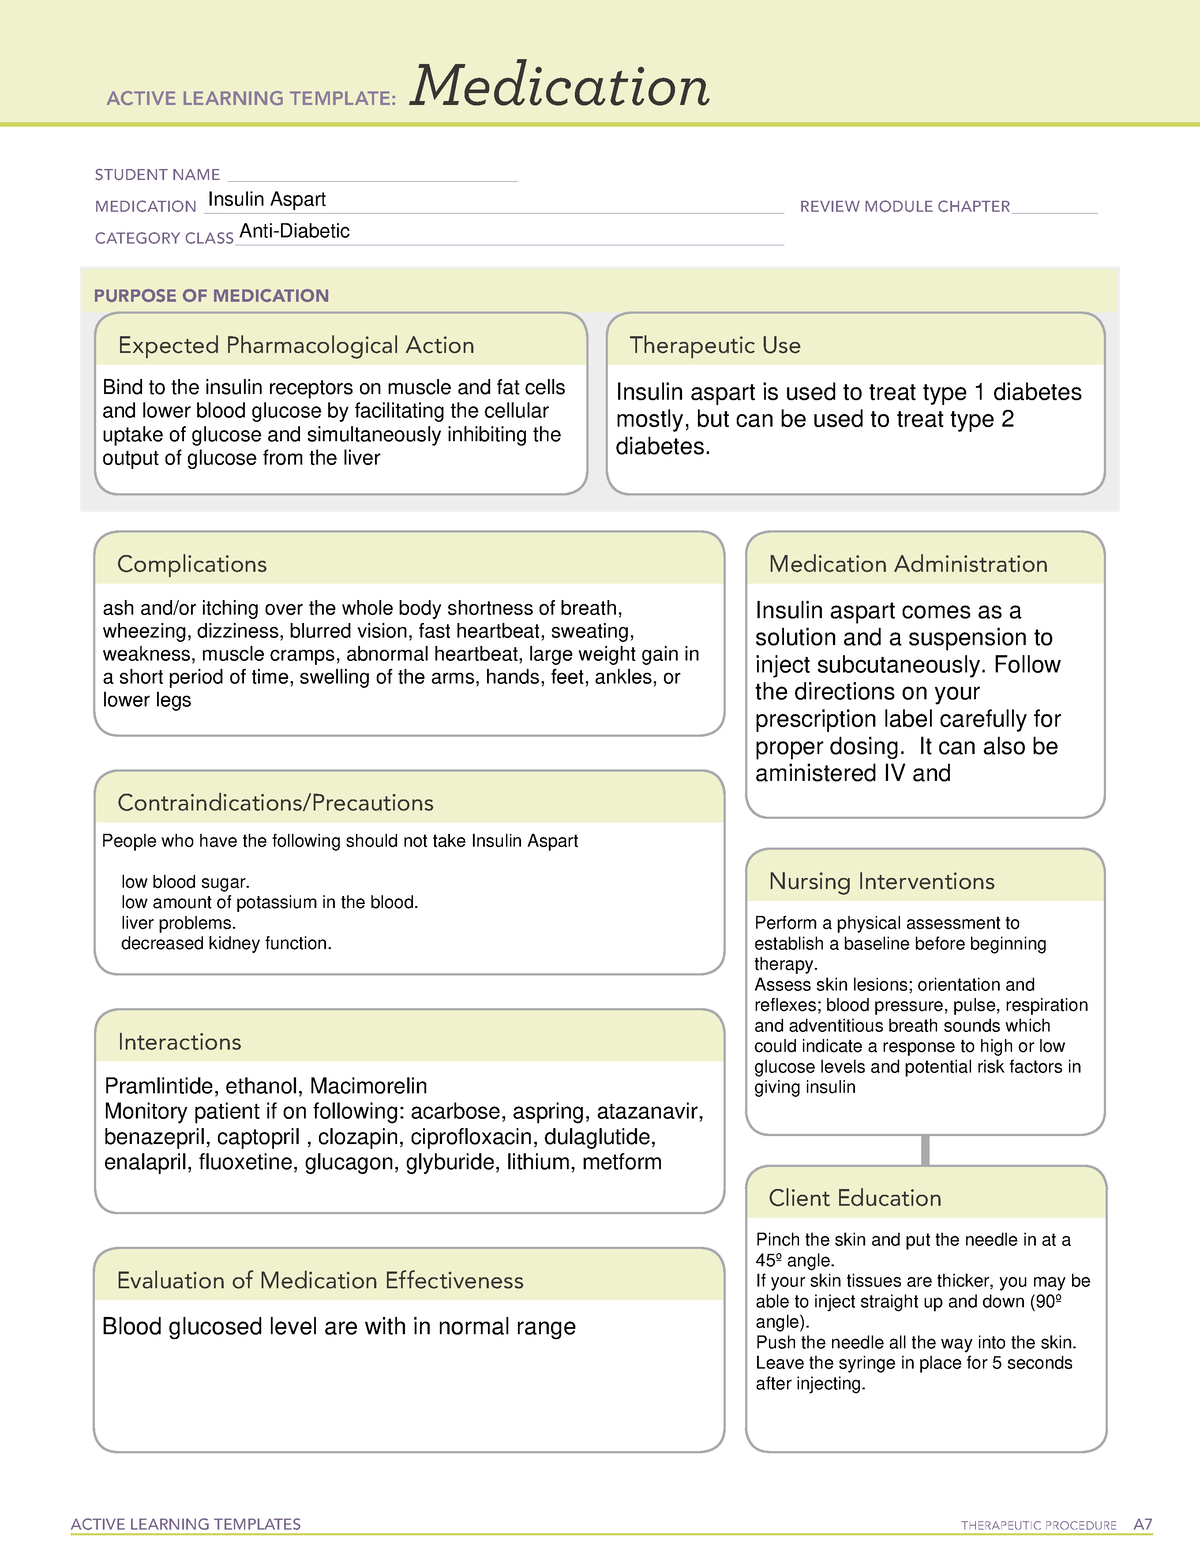 ATI Insulin Aspart Med Form ACTIVE LEARNING TEMPLATES THERAPEUTIC